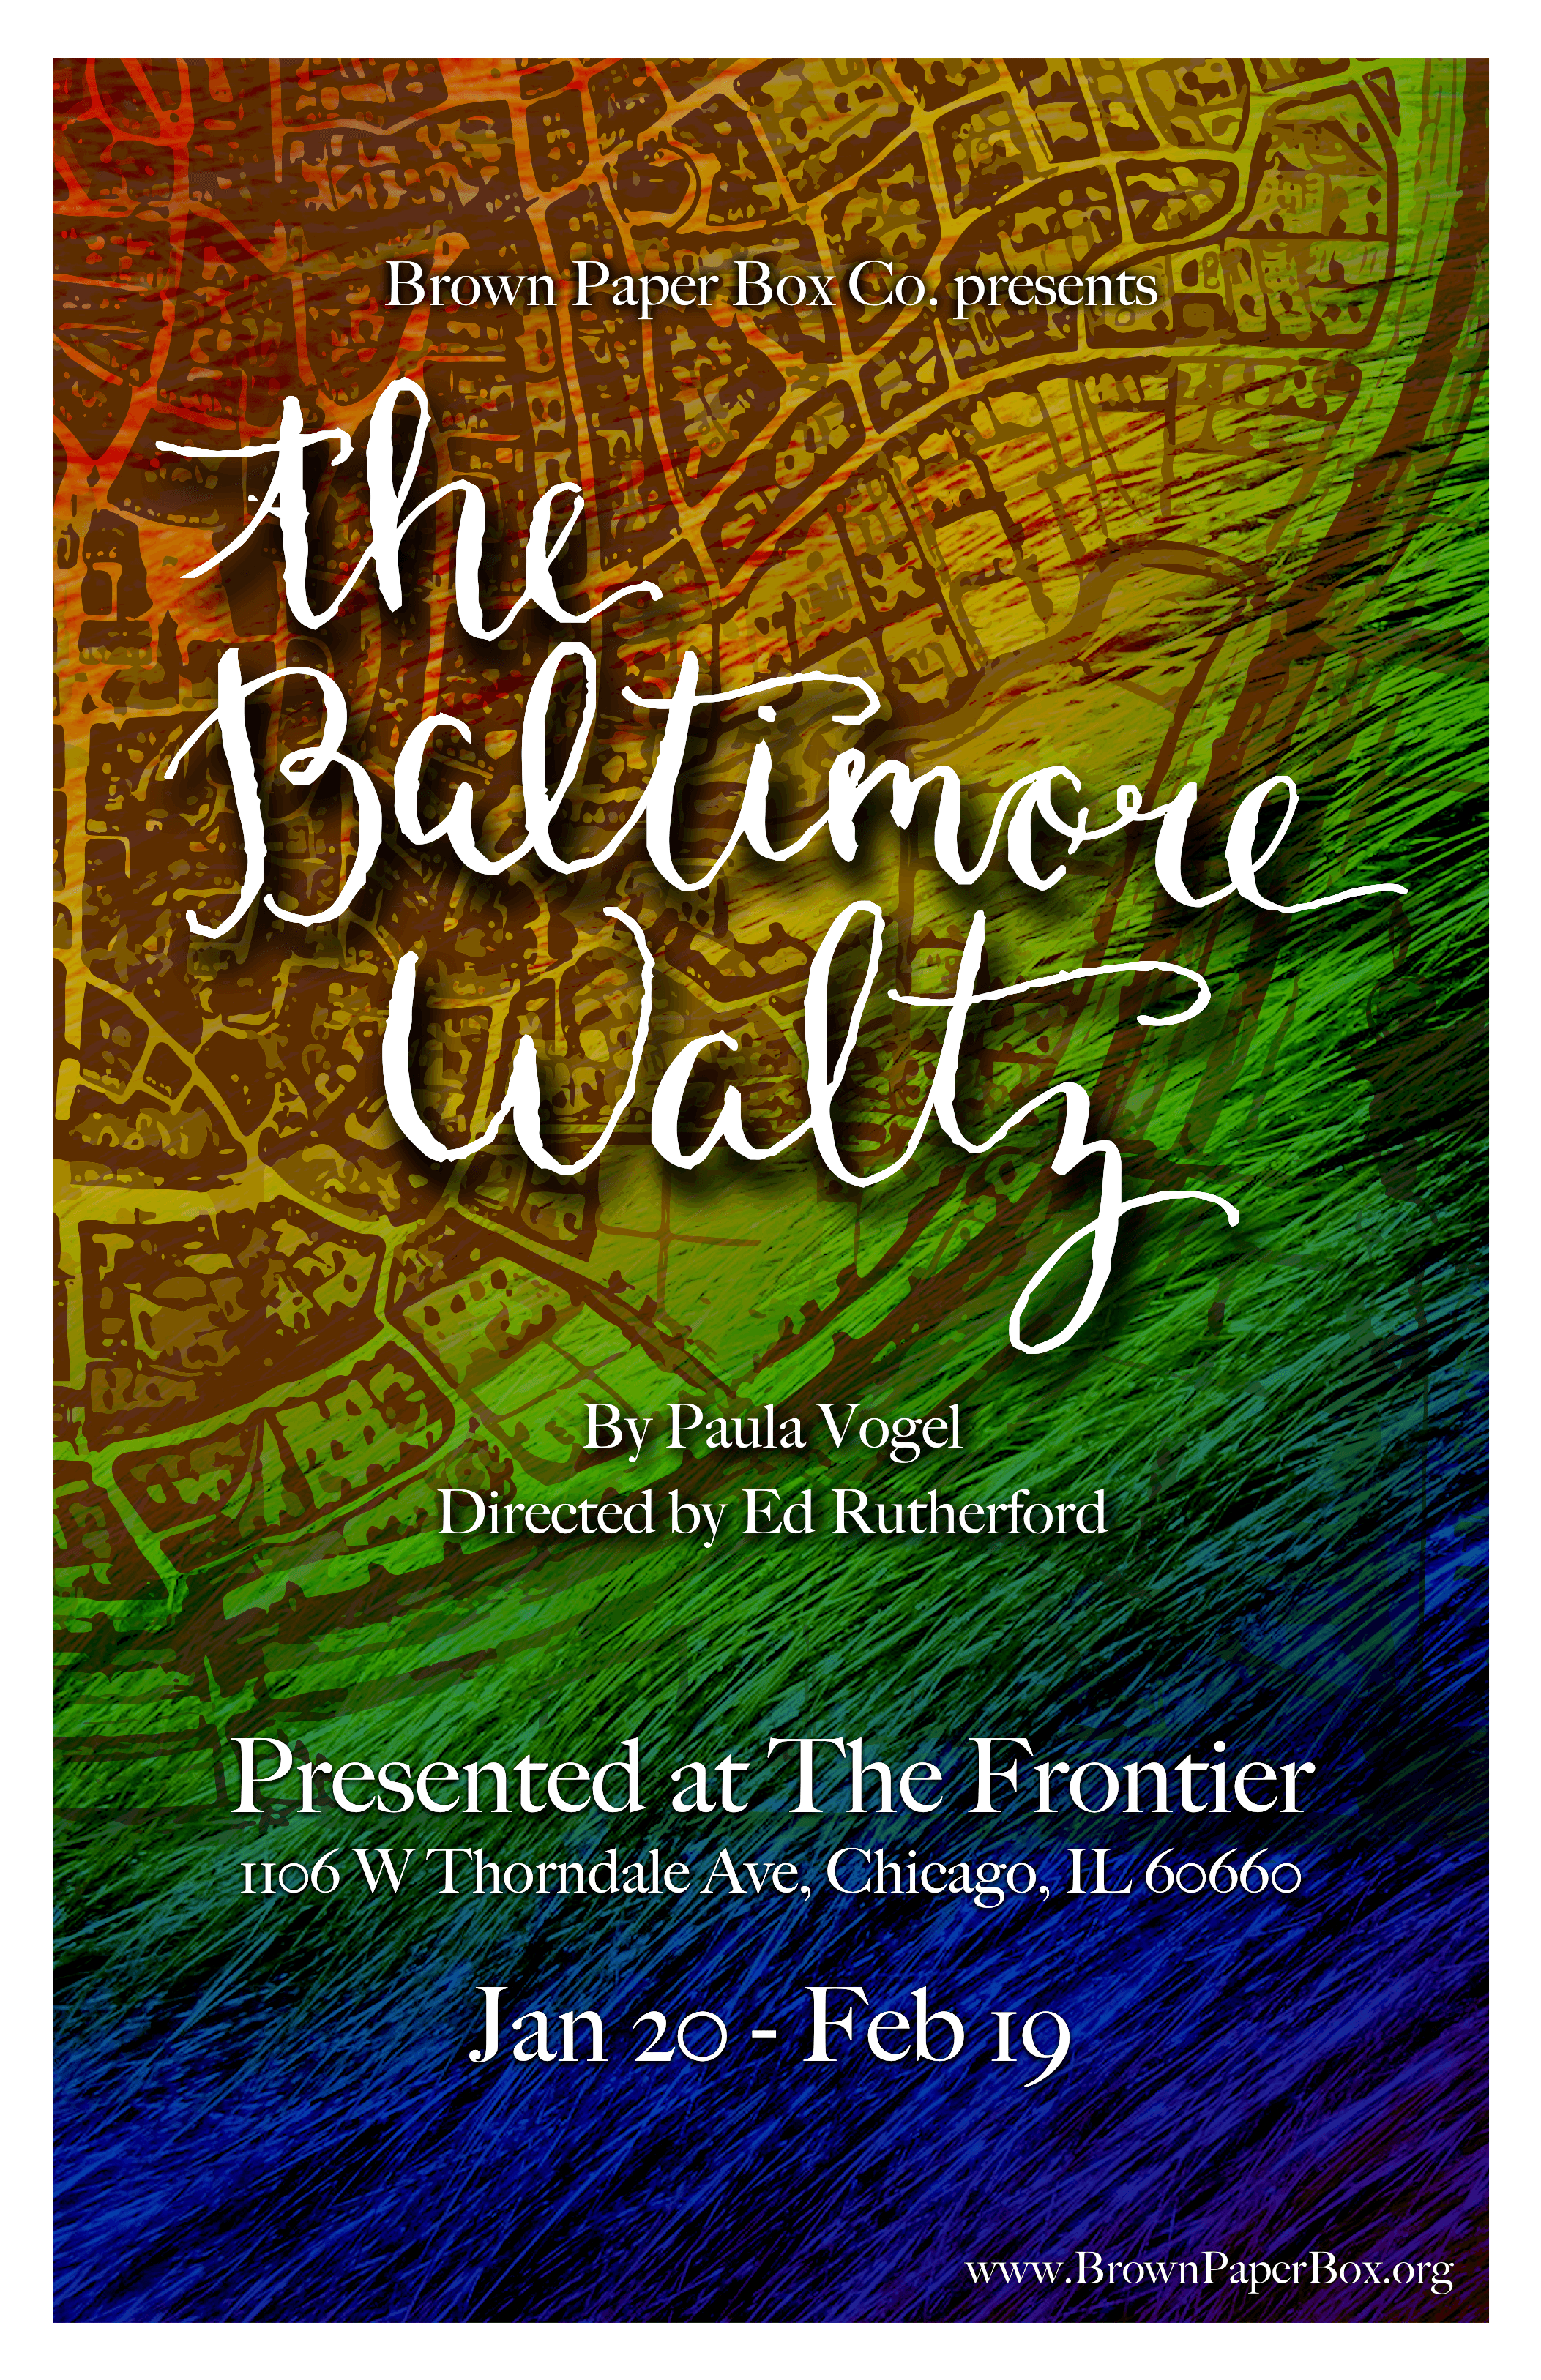 Brown Paper Box Co.'s The Baltimore Waltz opens Jan 21 2 Brown Paper Box Co. is excited to announce their second main stage production of their 2016/2017 season – The Baltimore Waltz by Pulitzer Prize winner Paula Vogel. This production opens this week, on Saturday, January 21, 2017 and runs Thursdays through Saturdays at 7:30 PM and Sundays at 2:30 PM through February 19, 2017 at The Frontier in Chicago’s Edgewater neighborhood (1106 W. Thorndale Avenue). A preview is scheduled for Friday, January 20, along with special Monday night performances on January 23 and February 6, both of which begin at 7:30 PM. Additionally, this production is a participant of Chicago Theatre Week 2017 and The Ghostlight Project and all tickets are on sale now. Photos from rehearsal can be found attached; information about ticket sales and more can be found at www.BrownPaperBox.org.